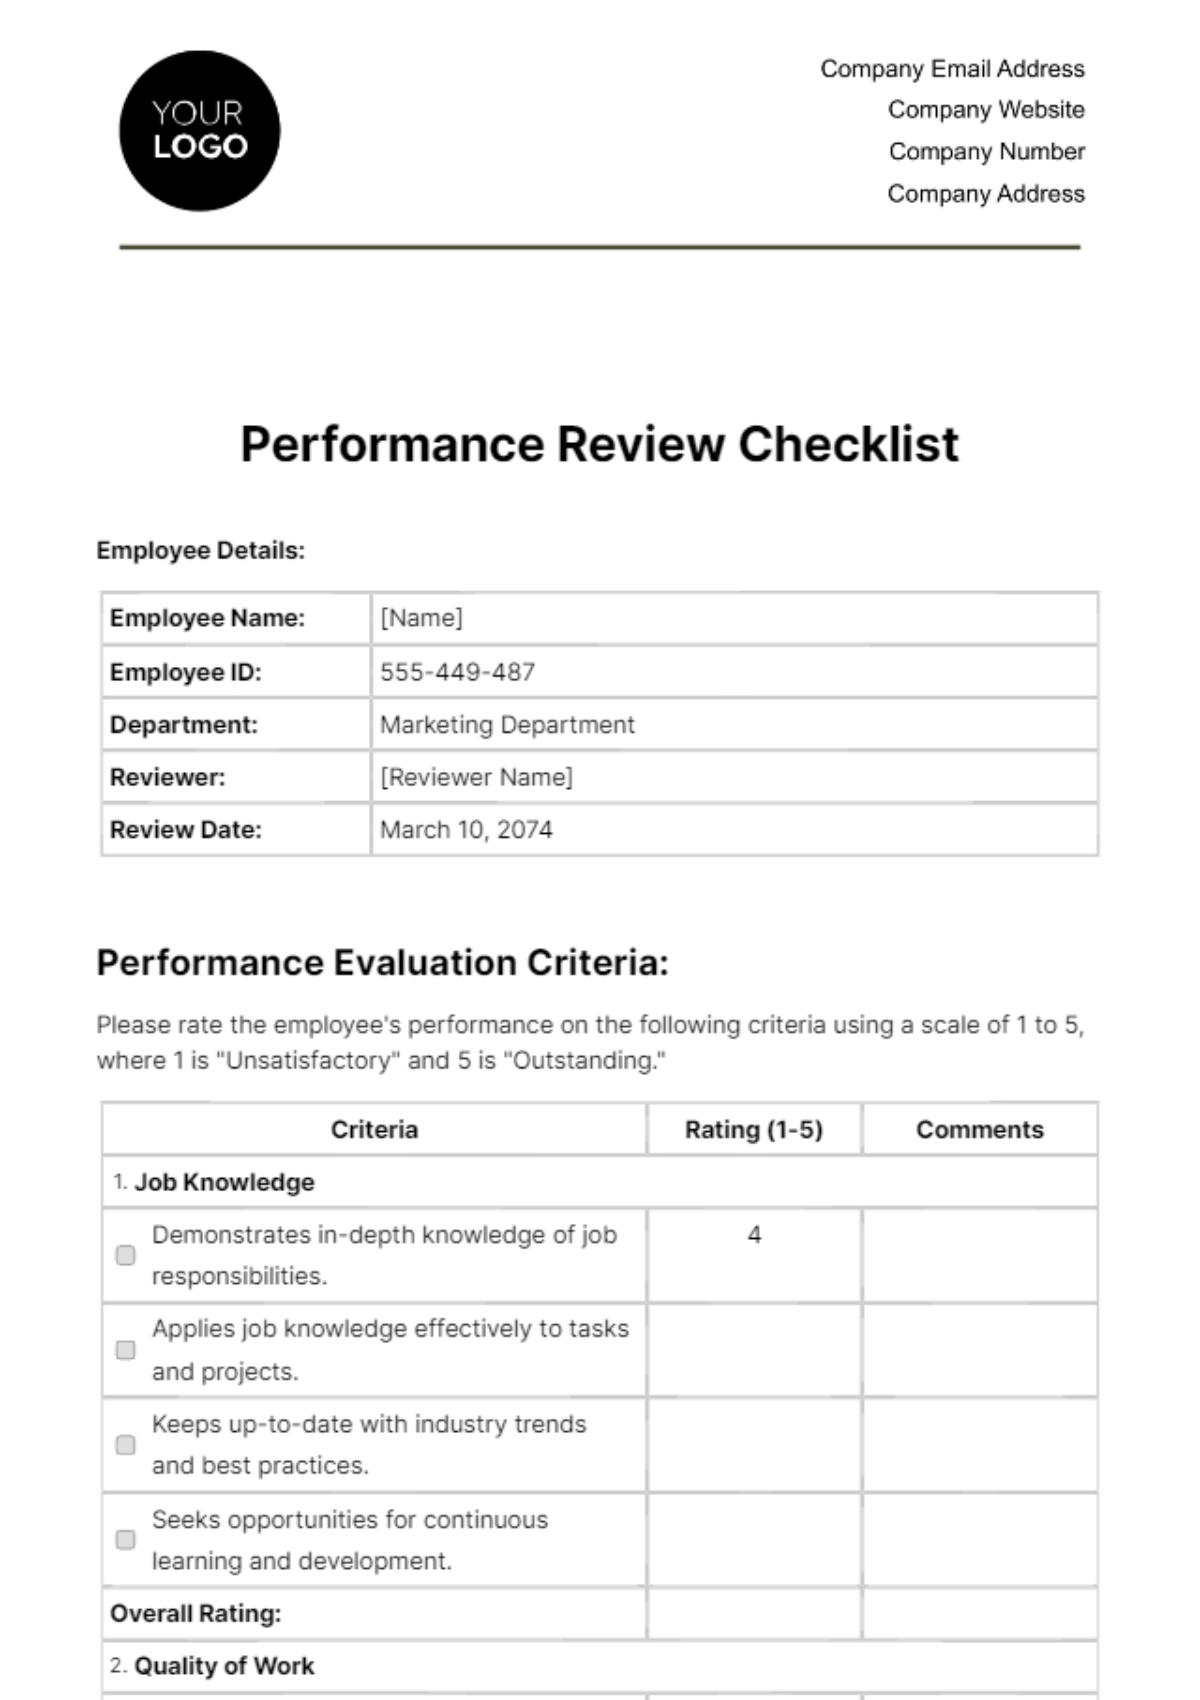 Performance Review Checklist HR Template